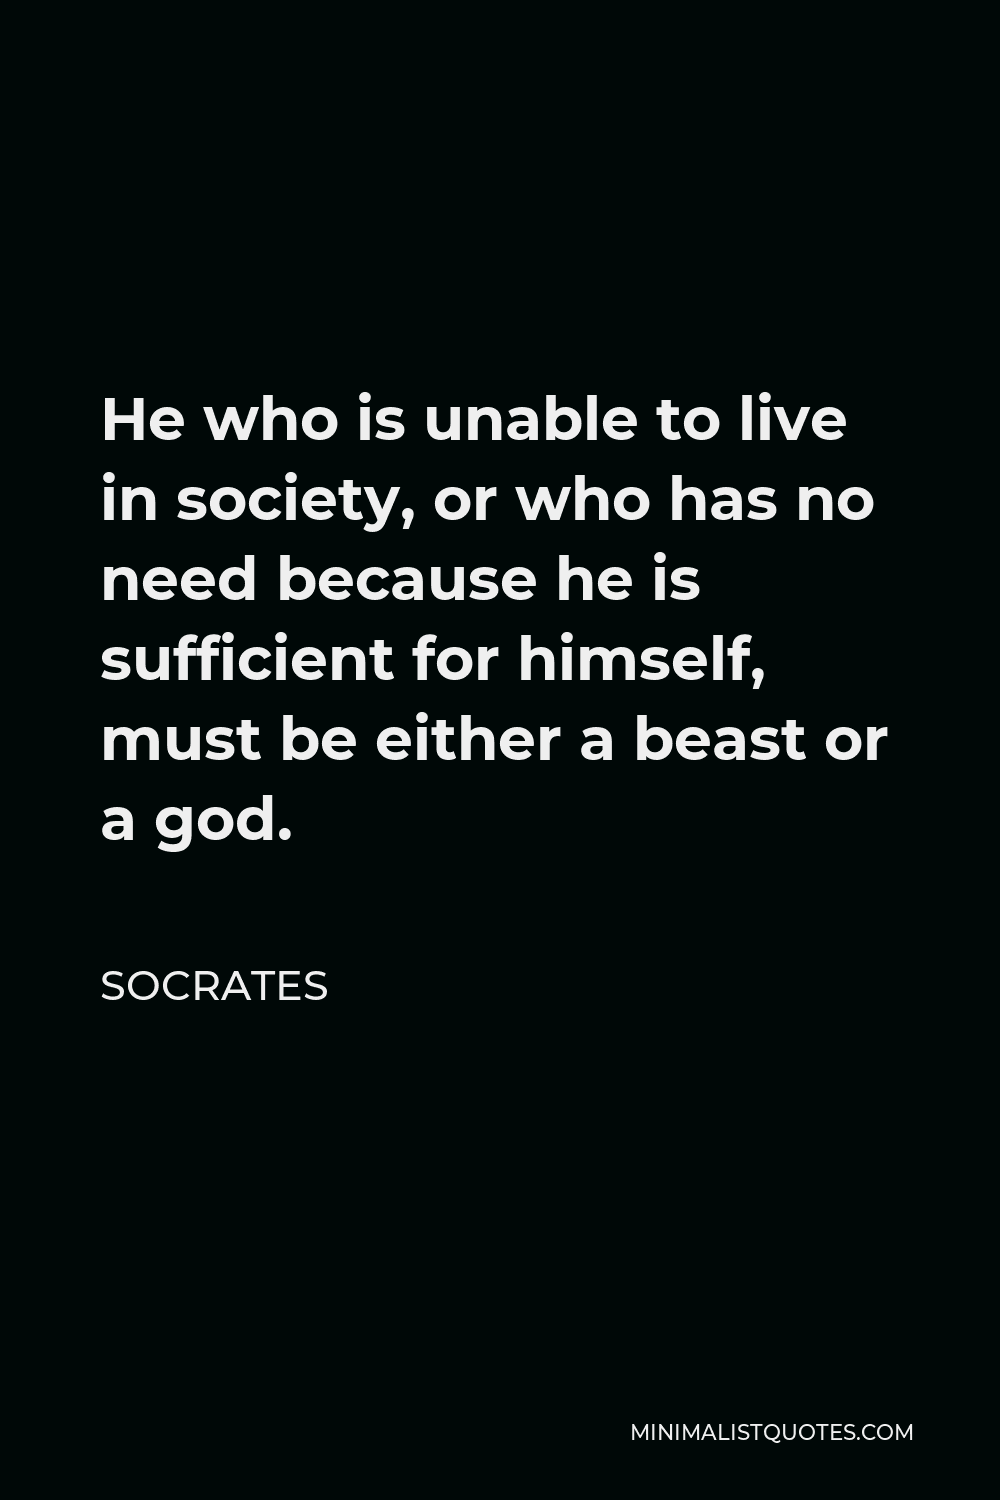 Socrates Quote - He who is unable to live in society, or who has no need because he is sufficient for himself, must be either a beast or a god.